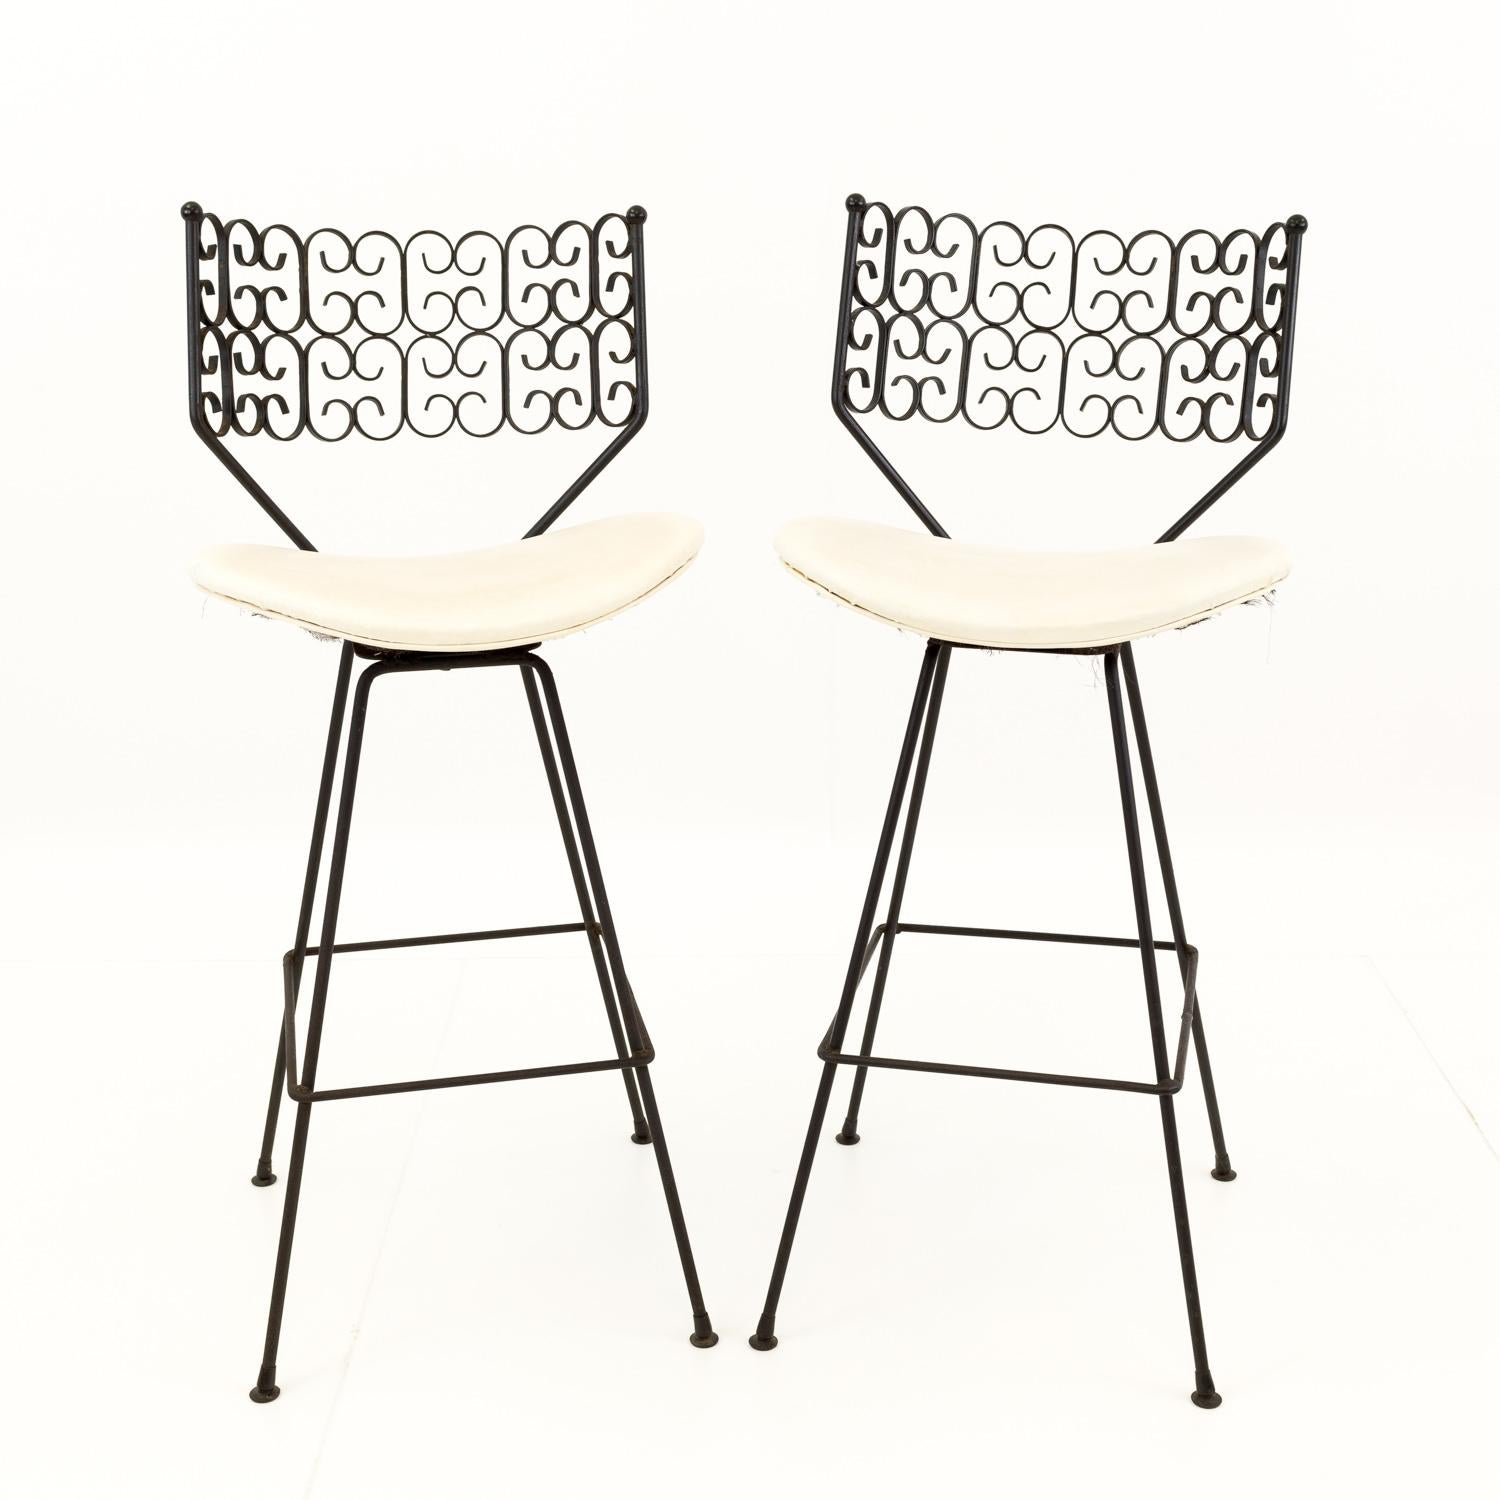 Pair of Arthur Umanoff for Shaver Howard Mid Century iron bar stools - 3 combinations available

Each barstool measures: 19 wide x 22 deep x 41 high and has a seat height of 30 inches
One stool is missing a foot but otherwise, all are in very good